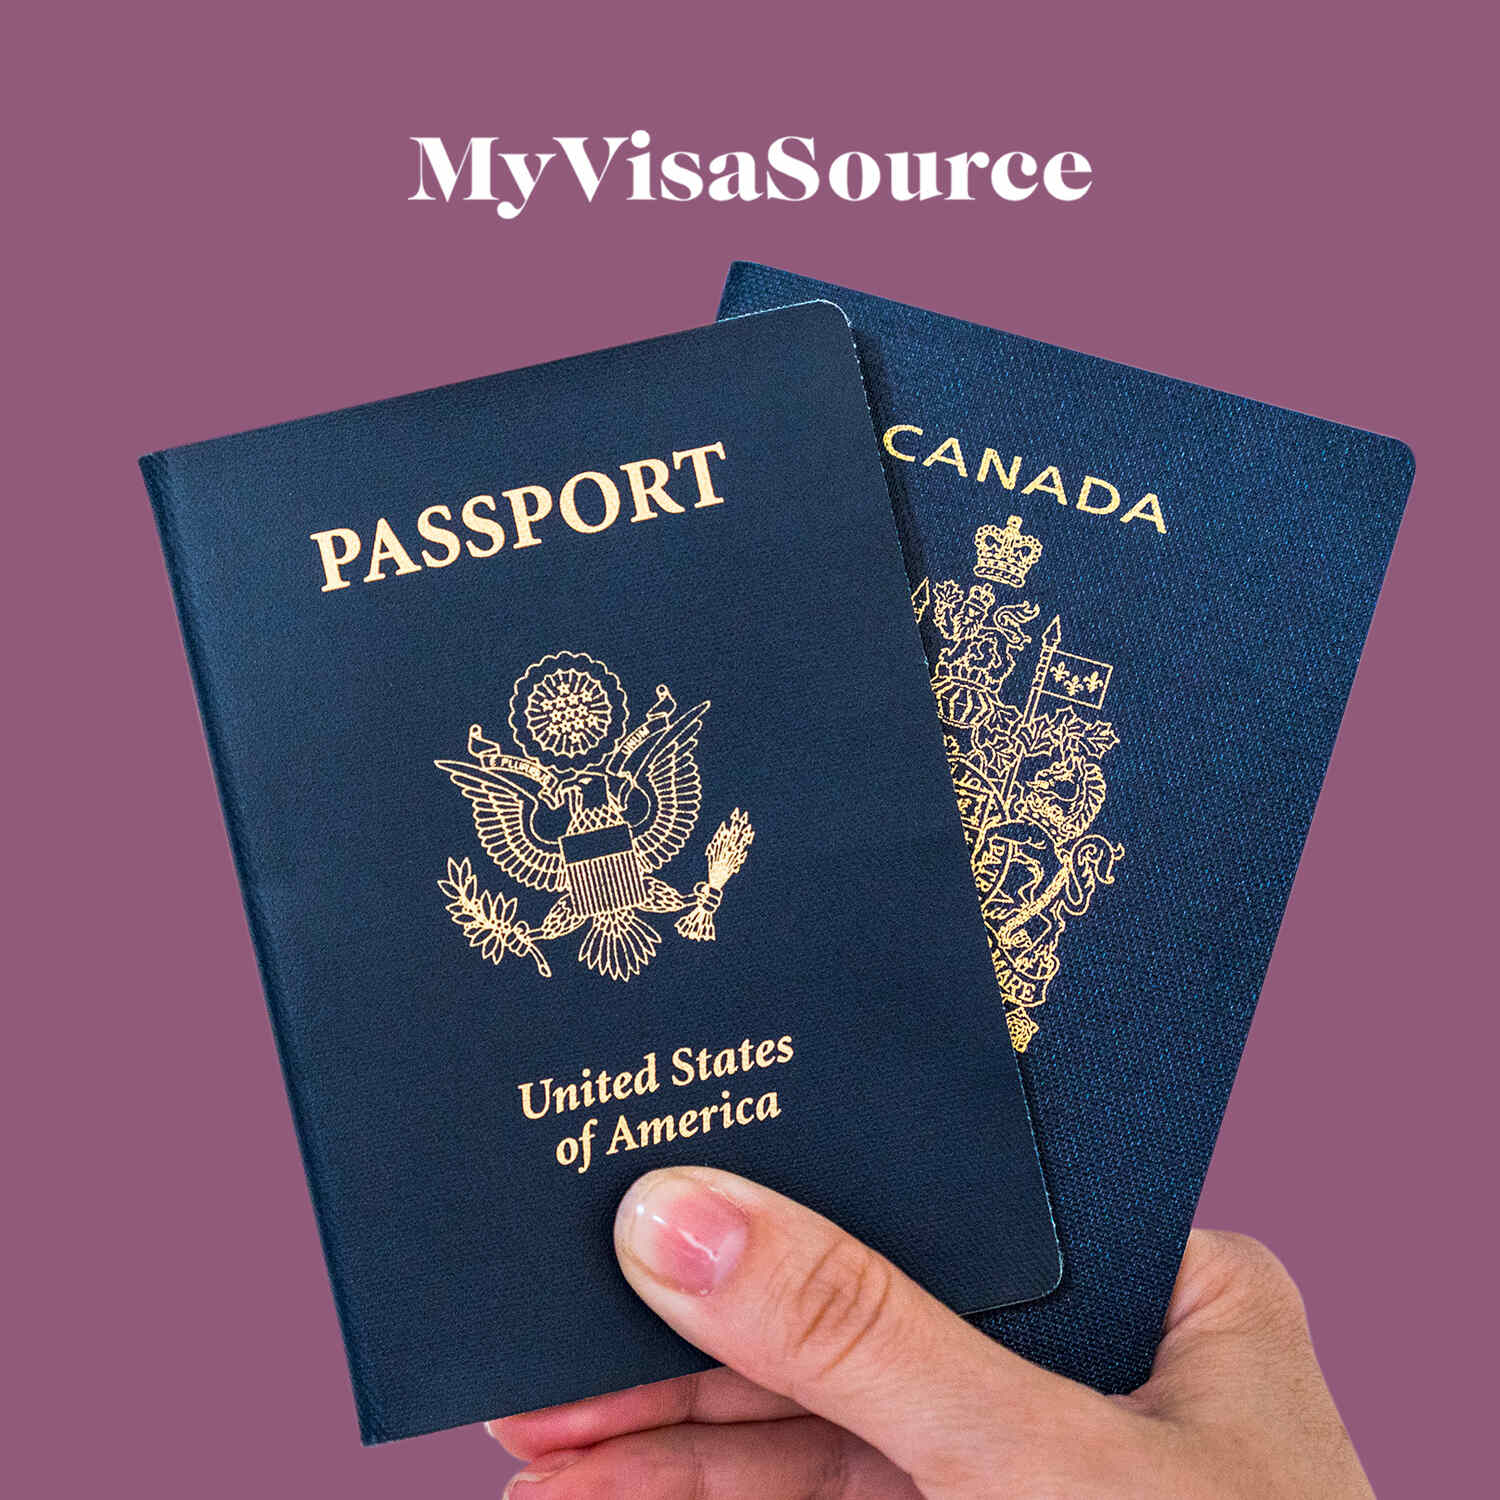 travelling to canada as a us citizen